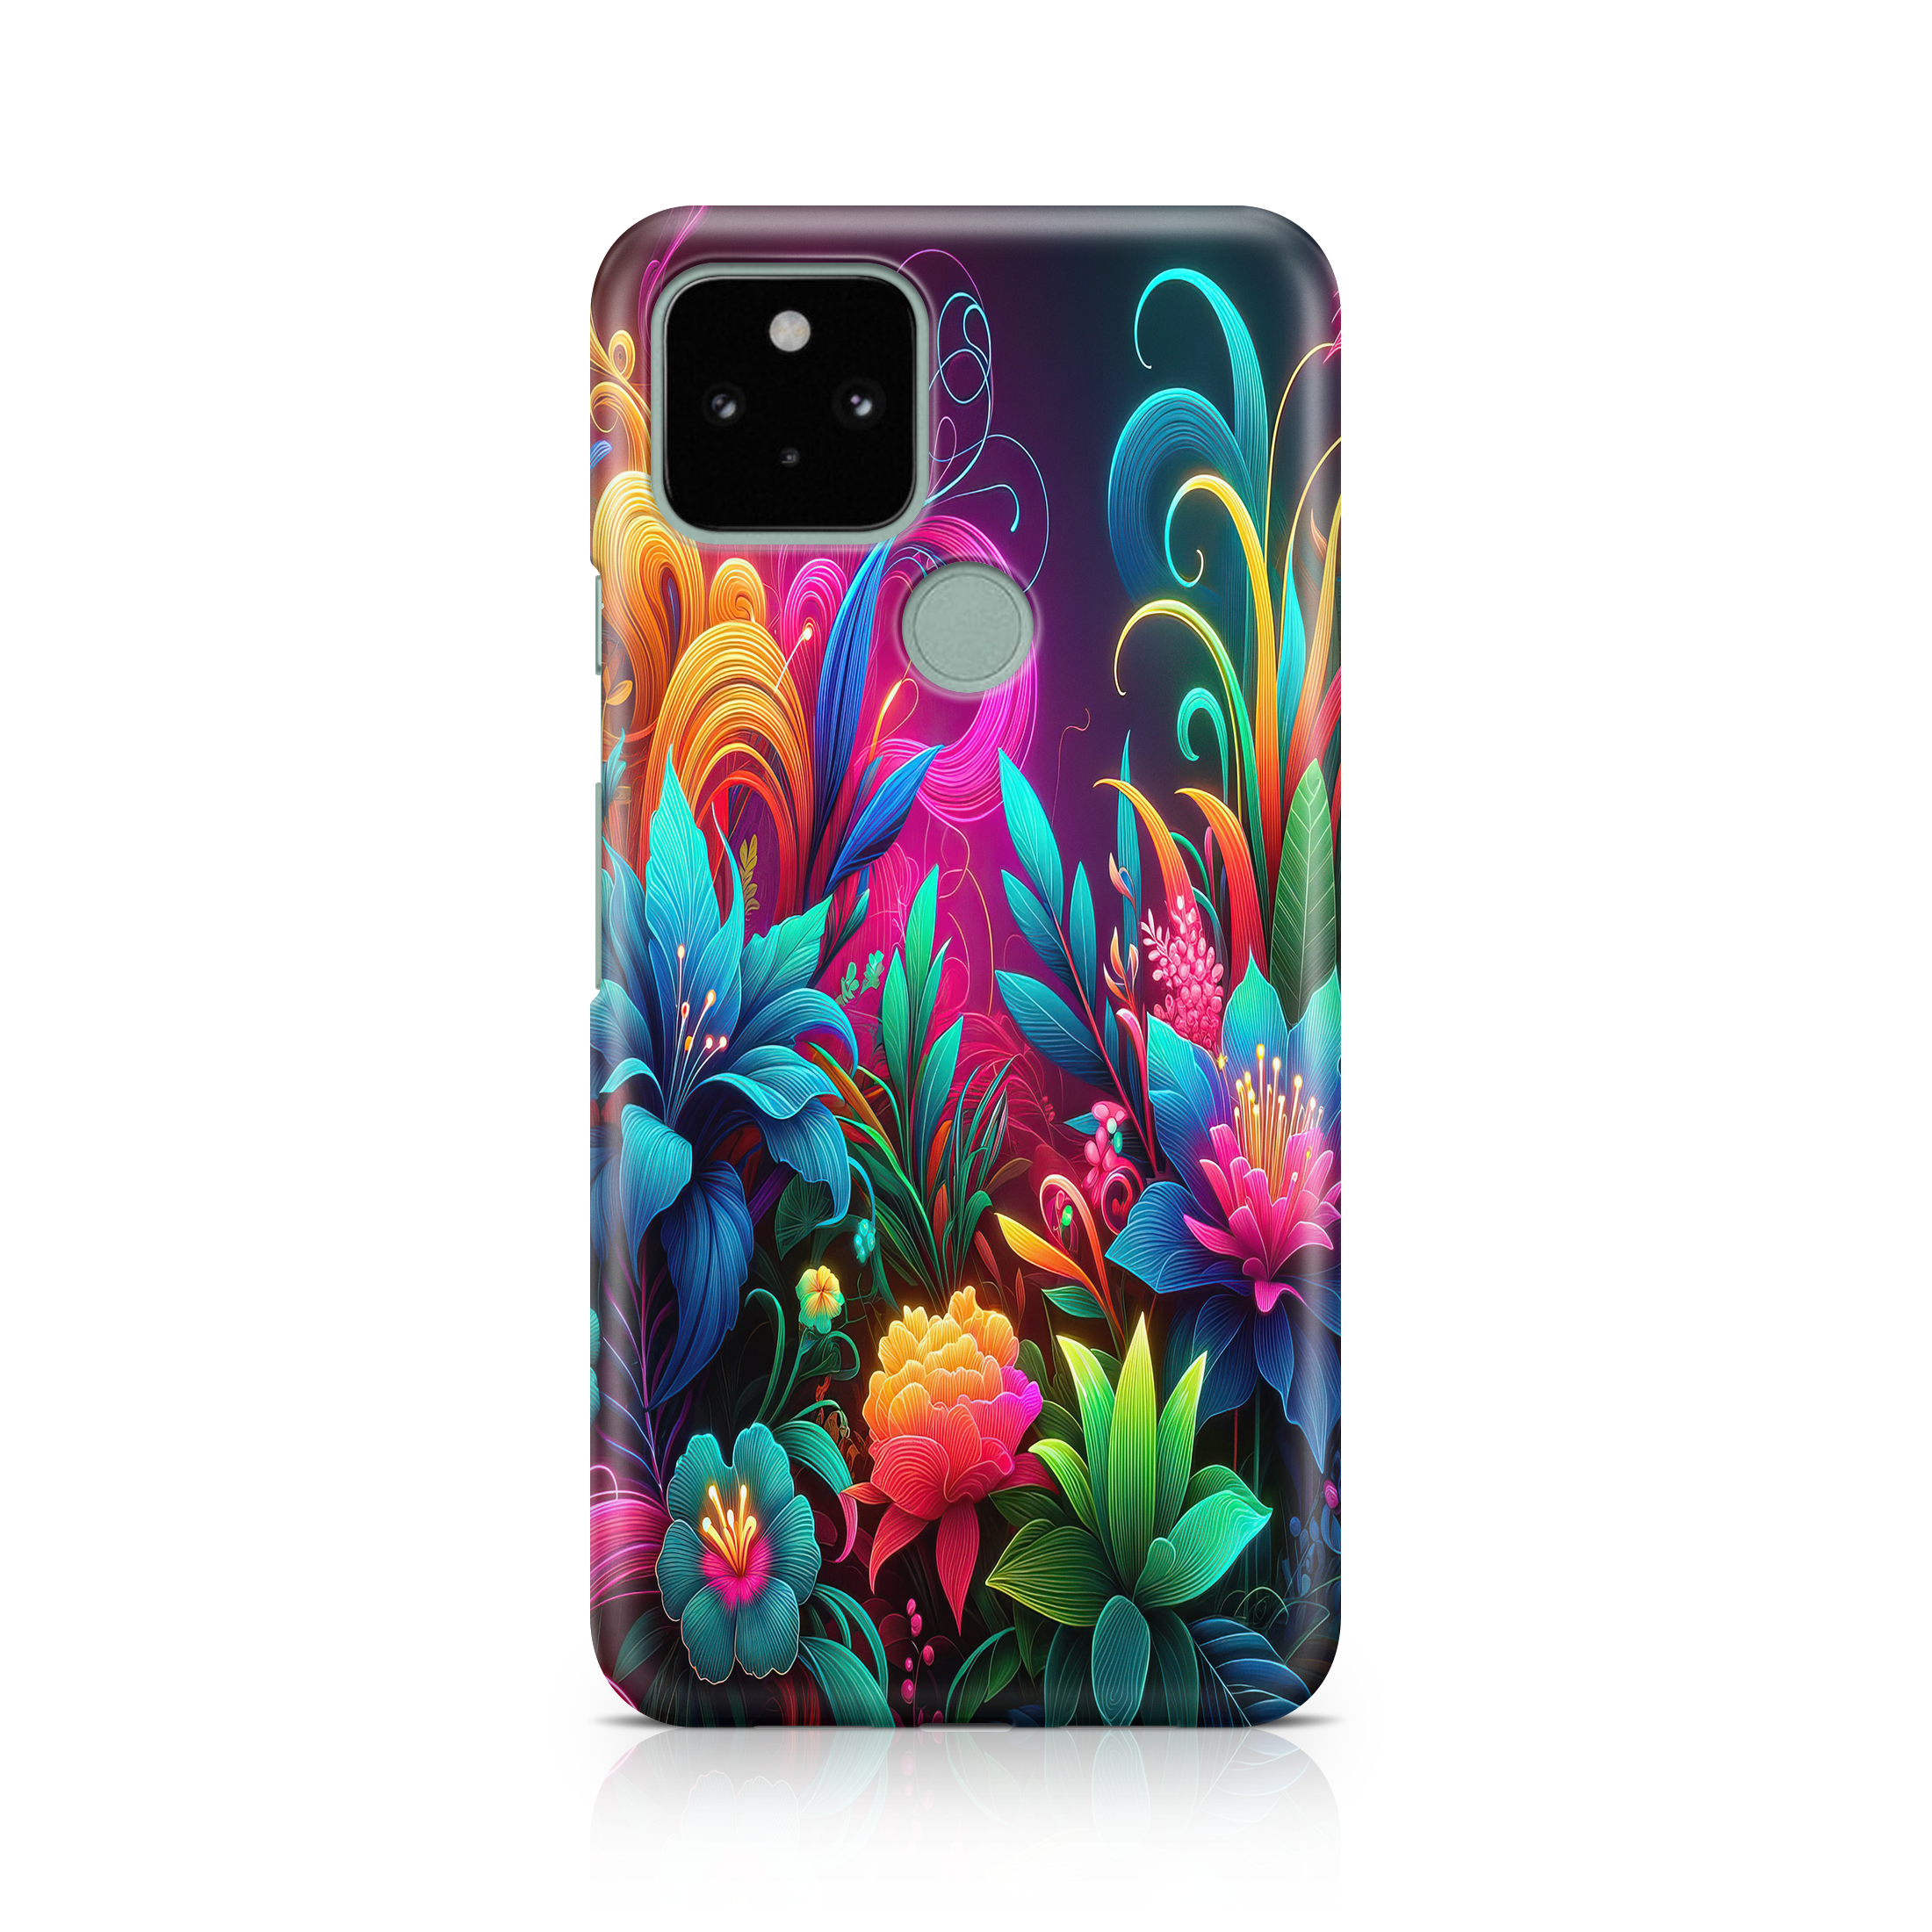 Neon Nectar - Google phone case designs by CaseSwagger